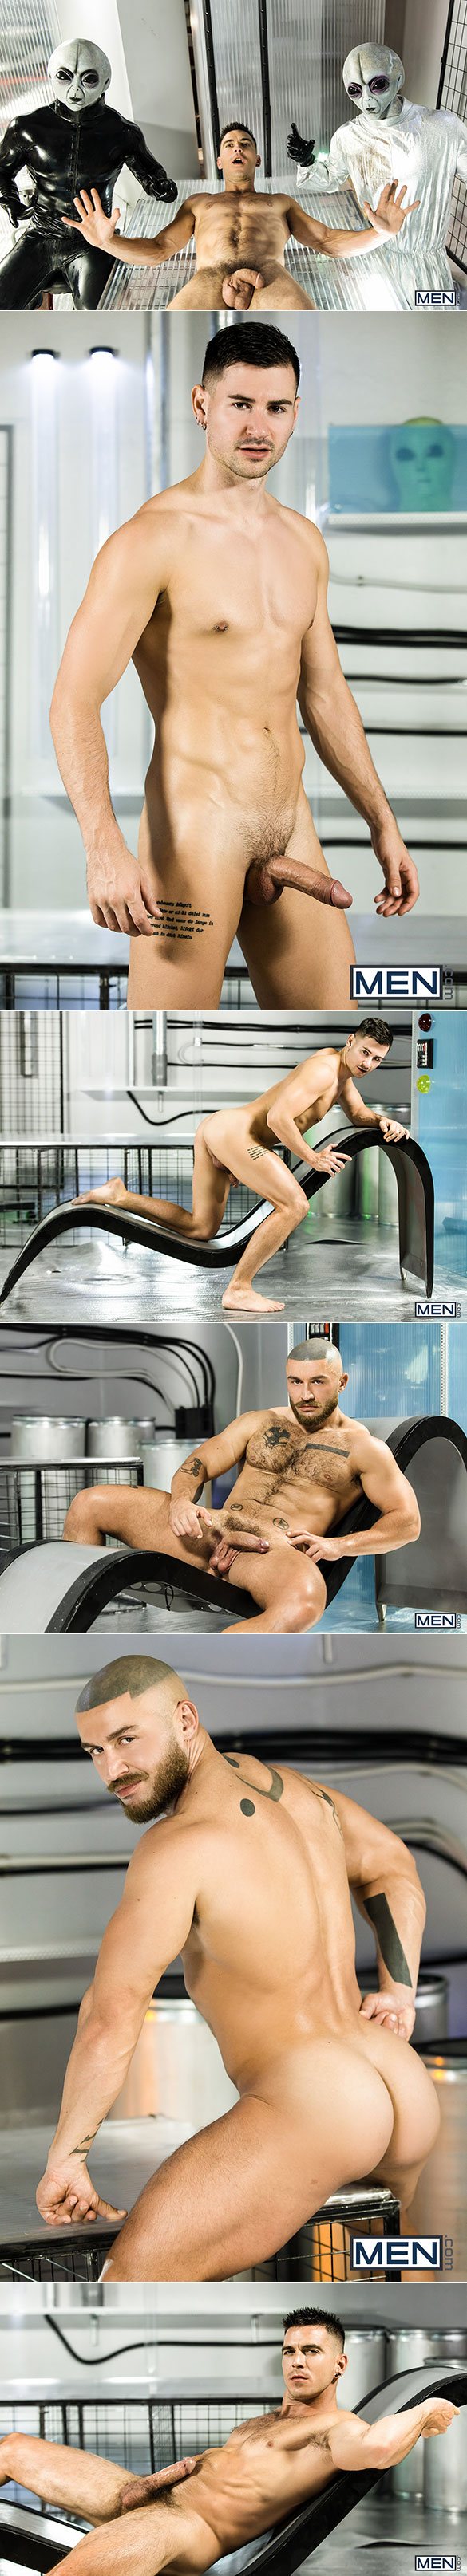 Men.com: Paddy O'Brian, Francois Sagat and Lukas Daken in "Anal Abduction"